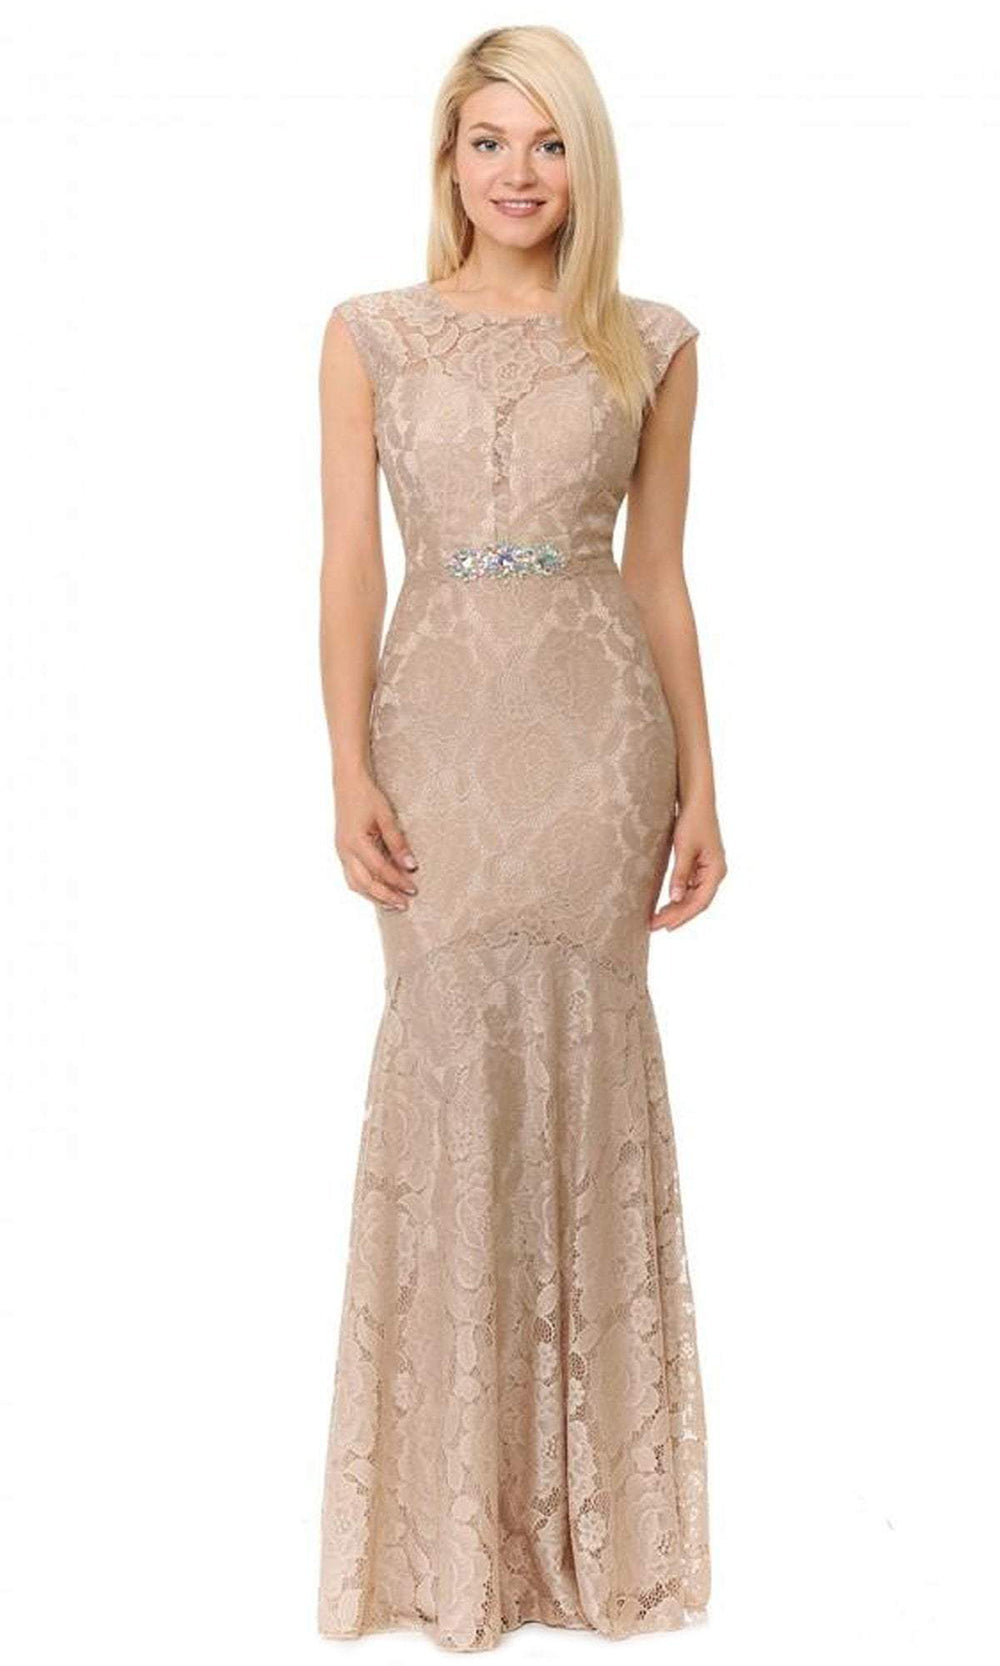 Lenovia - Lace Cap Sleeve Jewel Neck Mermaid Dress 5199 - 2 pcs Nude In Size S and M Available CCSALE S / Nude